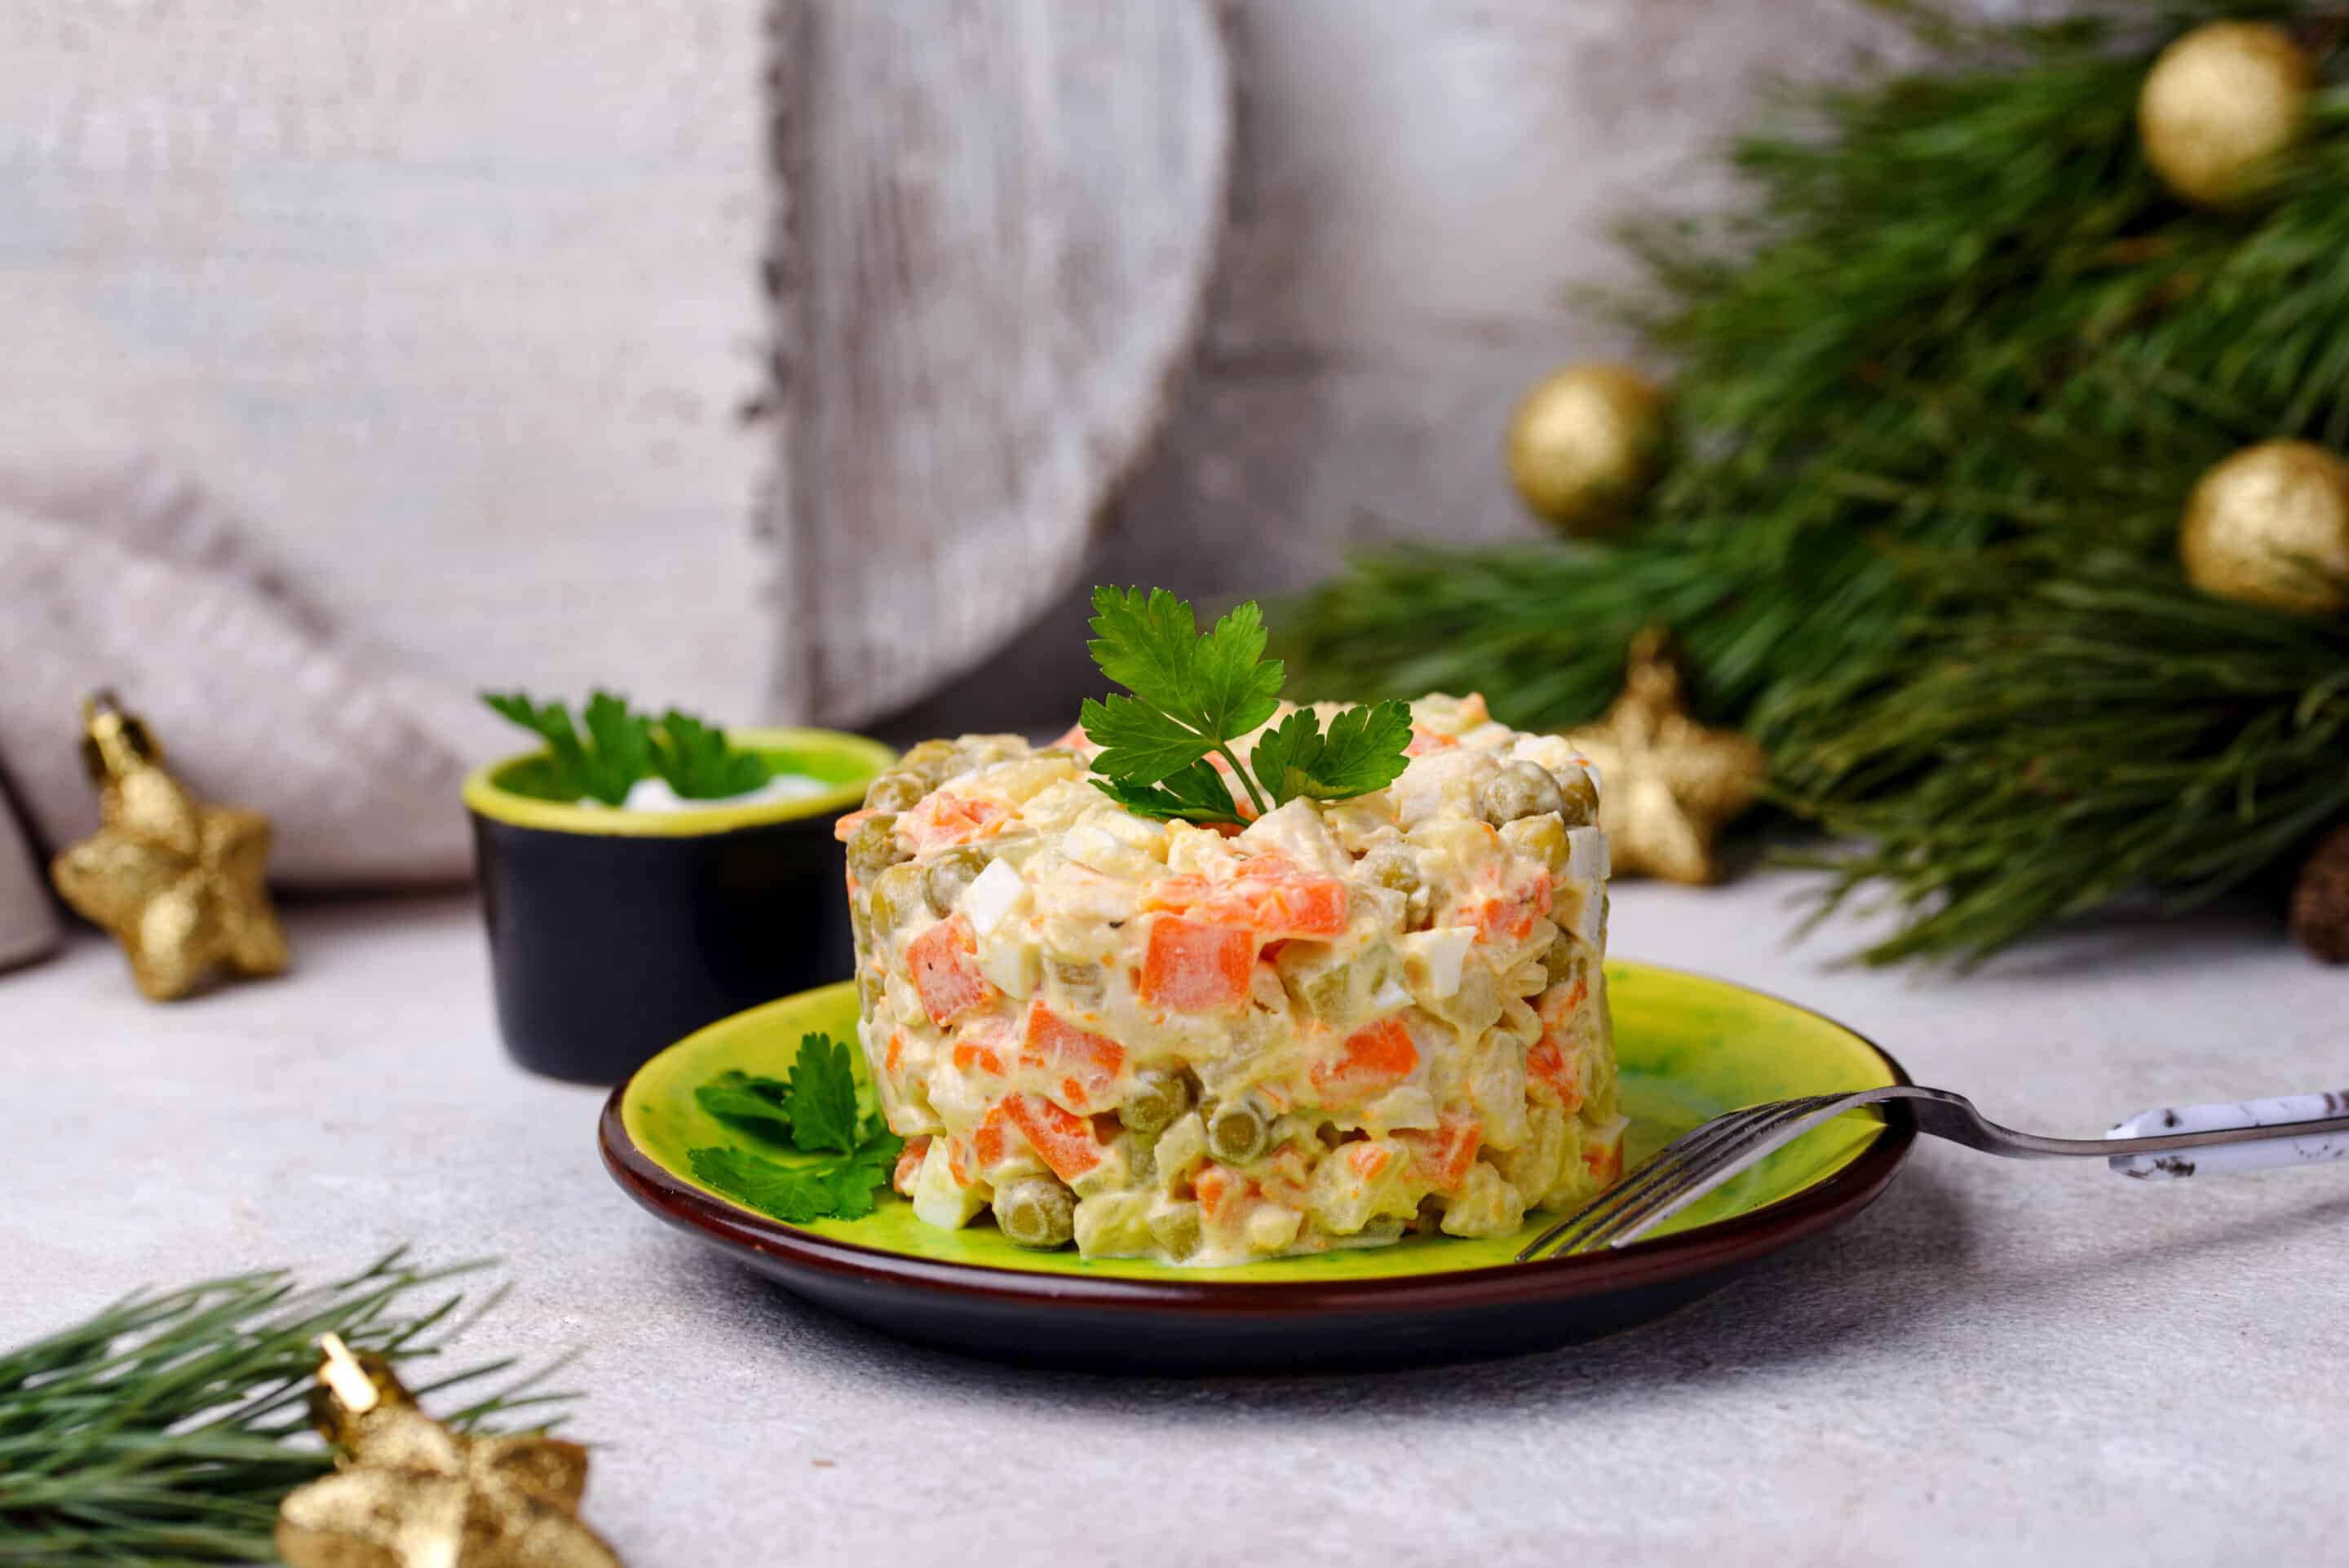 traditional new year russian salad olivier 2022 01 18 23 43 37 utc scaled